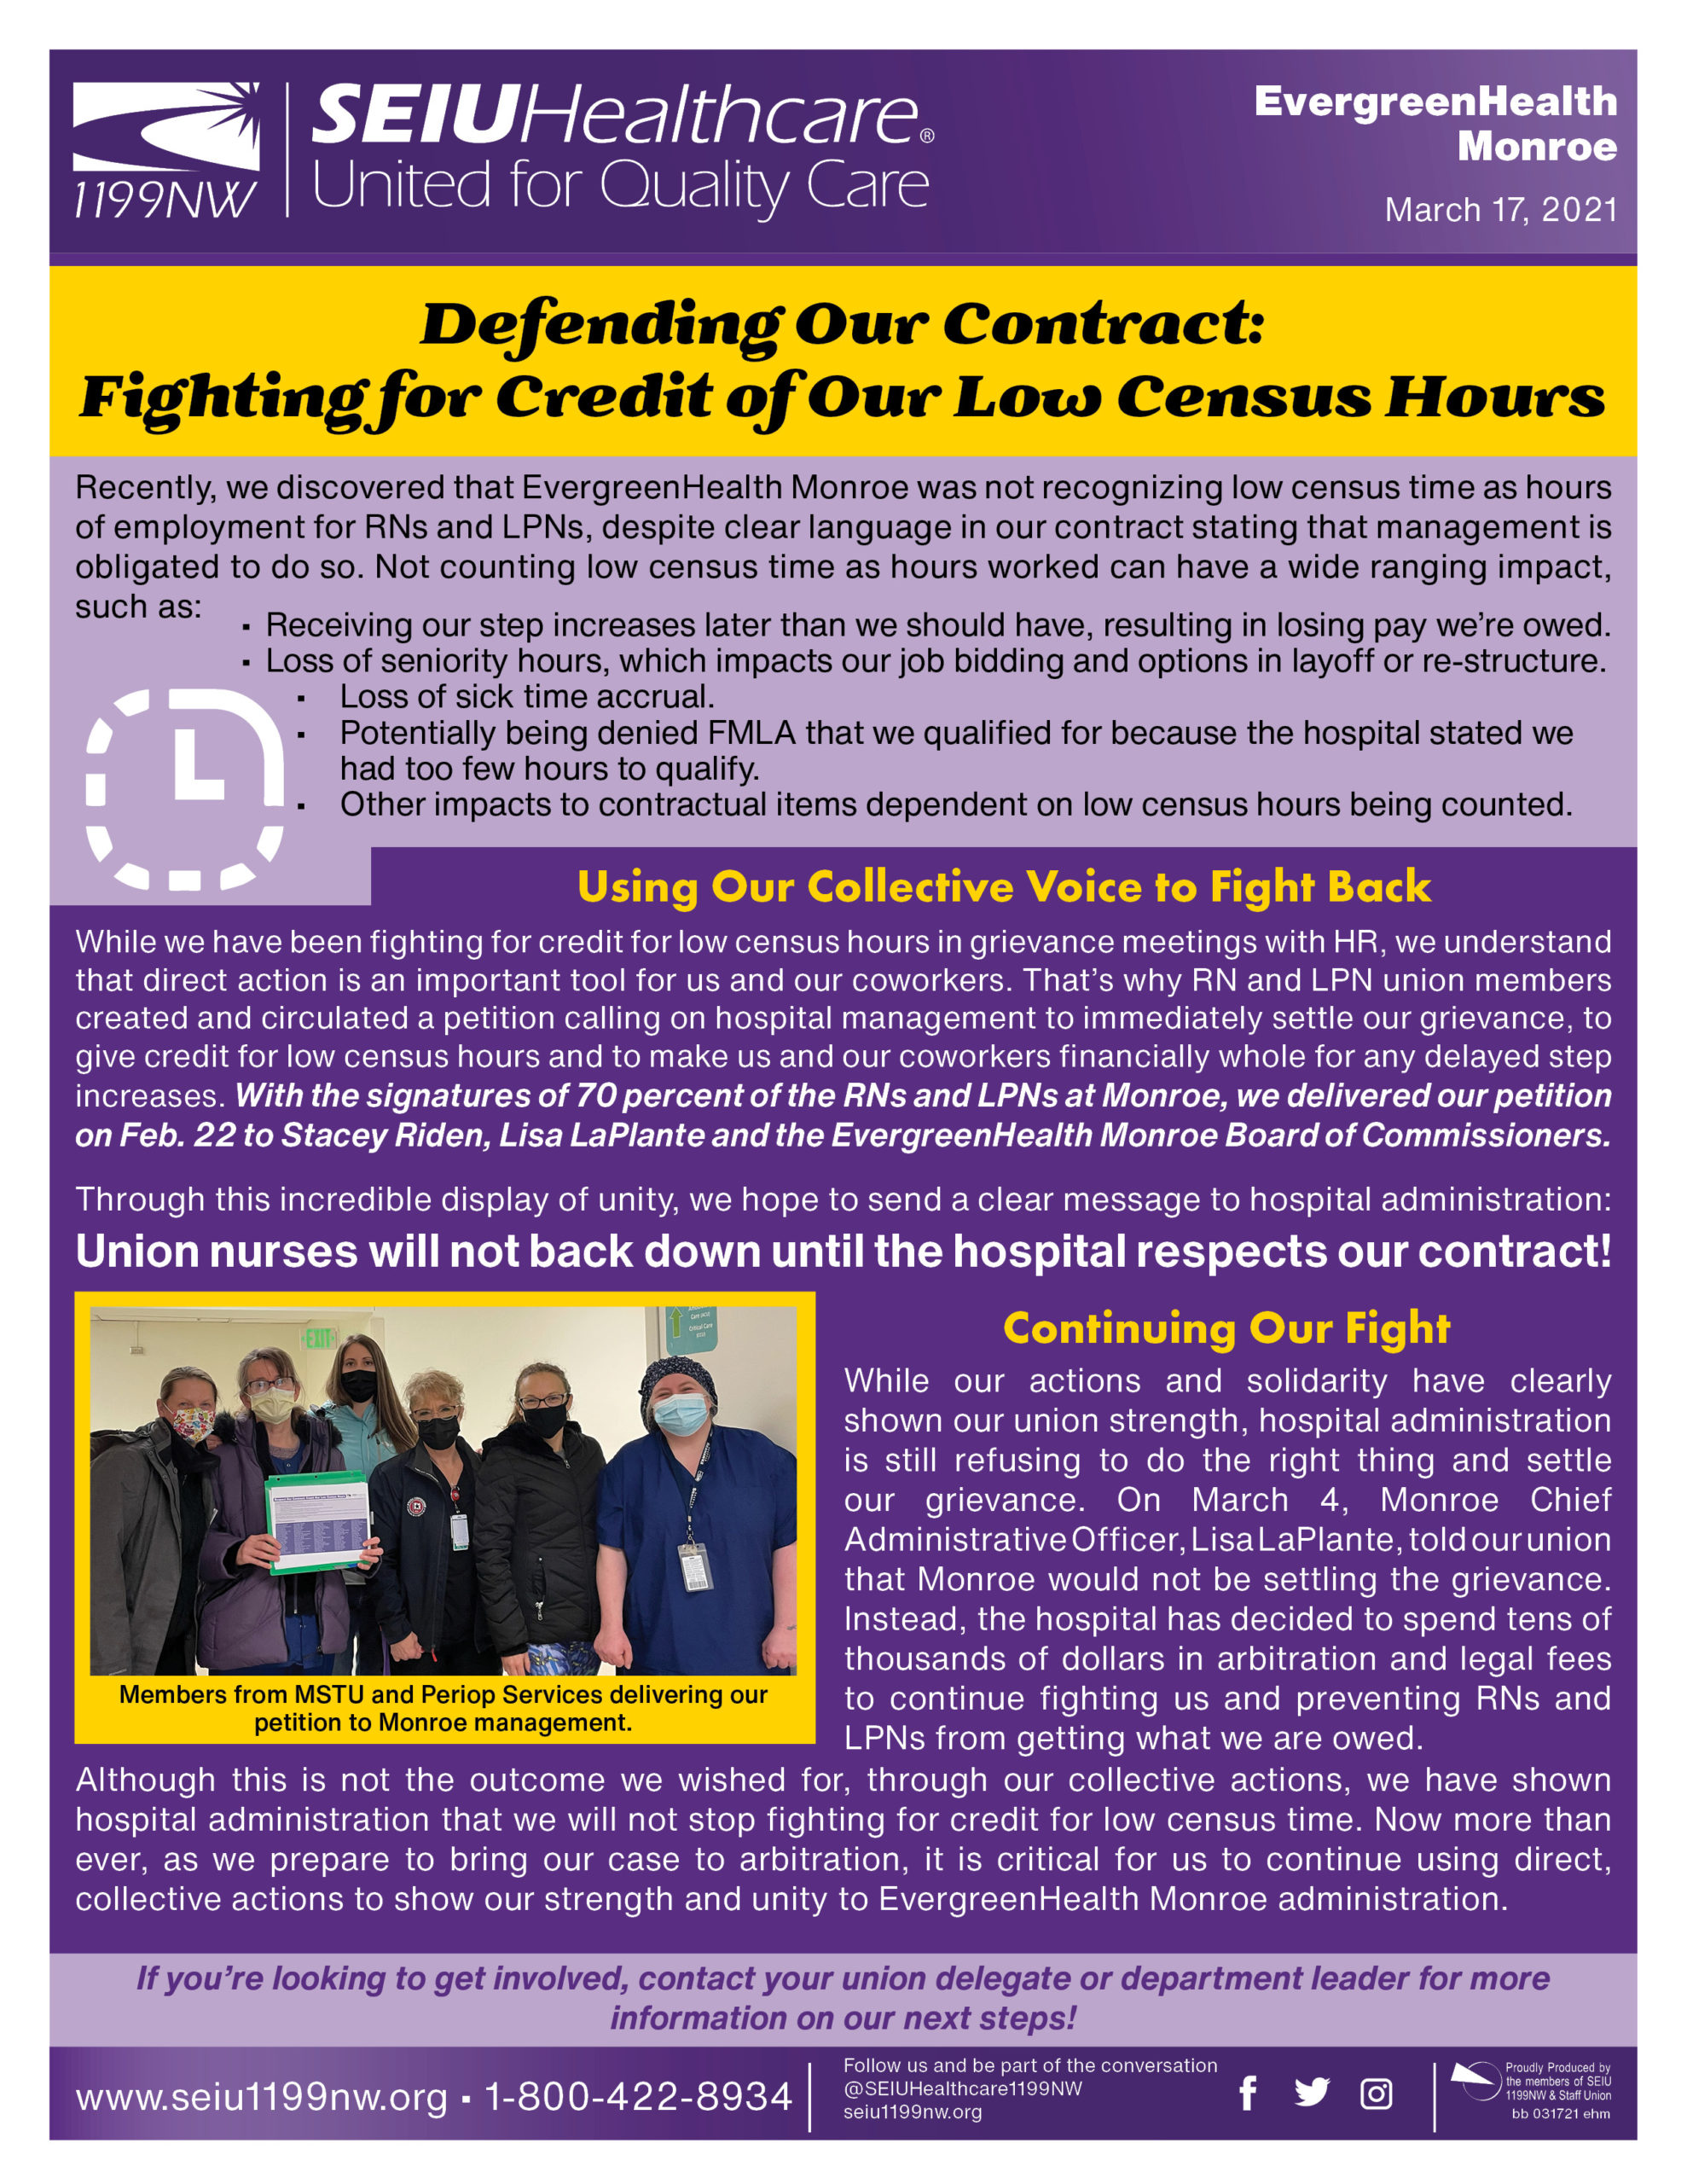 Defending Our Contract: Fighting for Credit of Our Low Census Hours